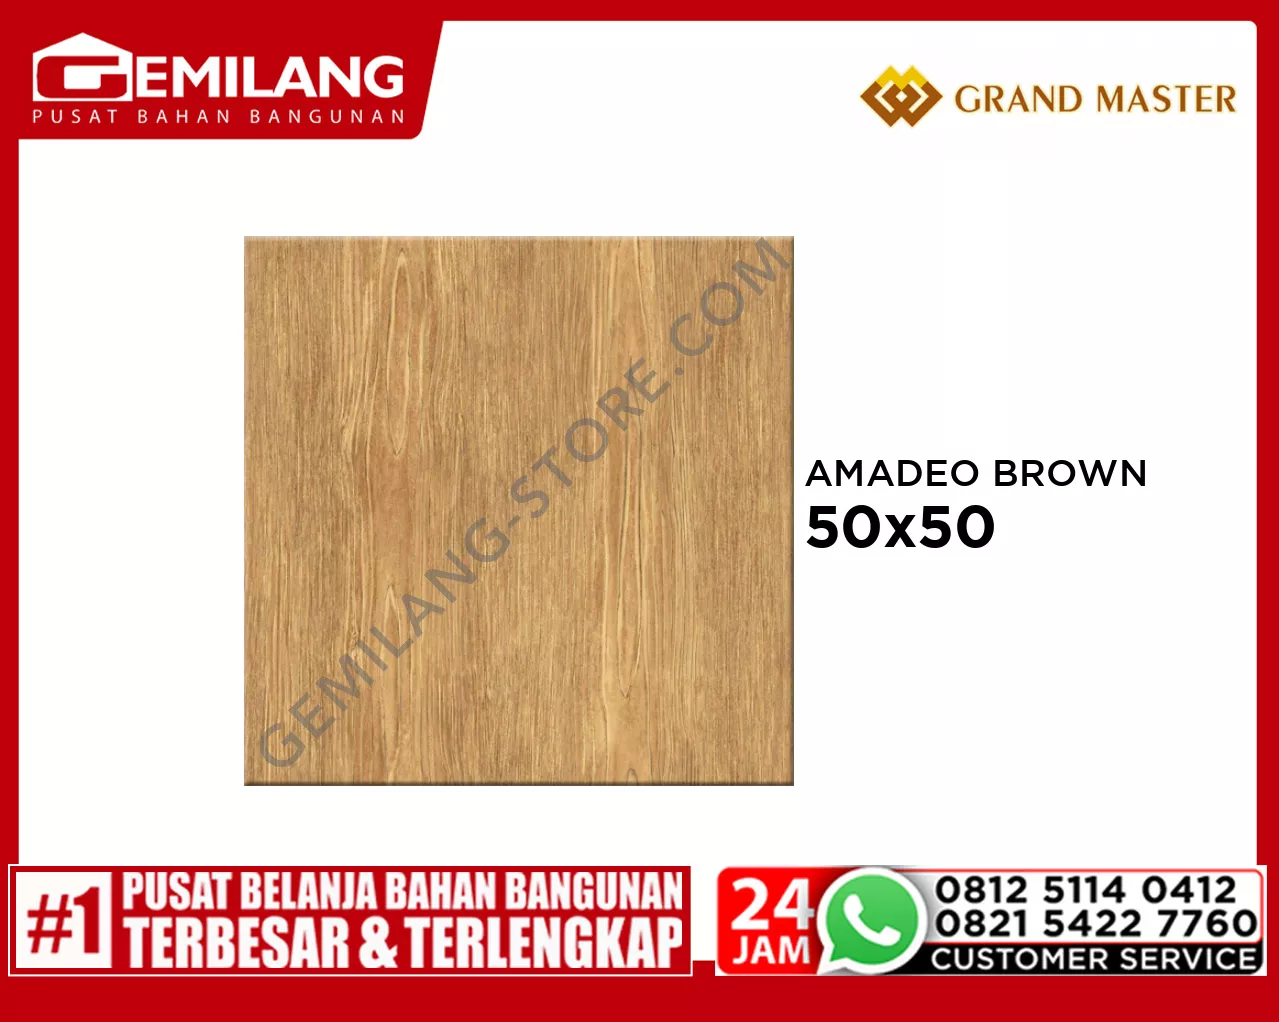 GRAND MASTER AMADEO BROWN 50 x 50